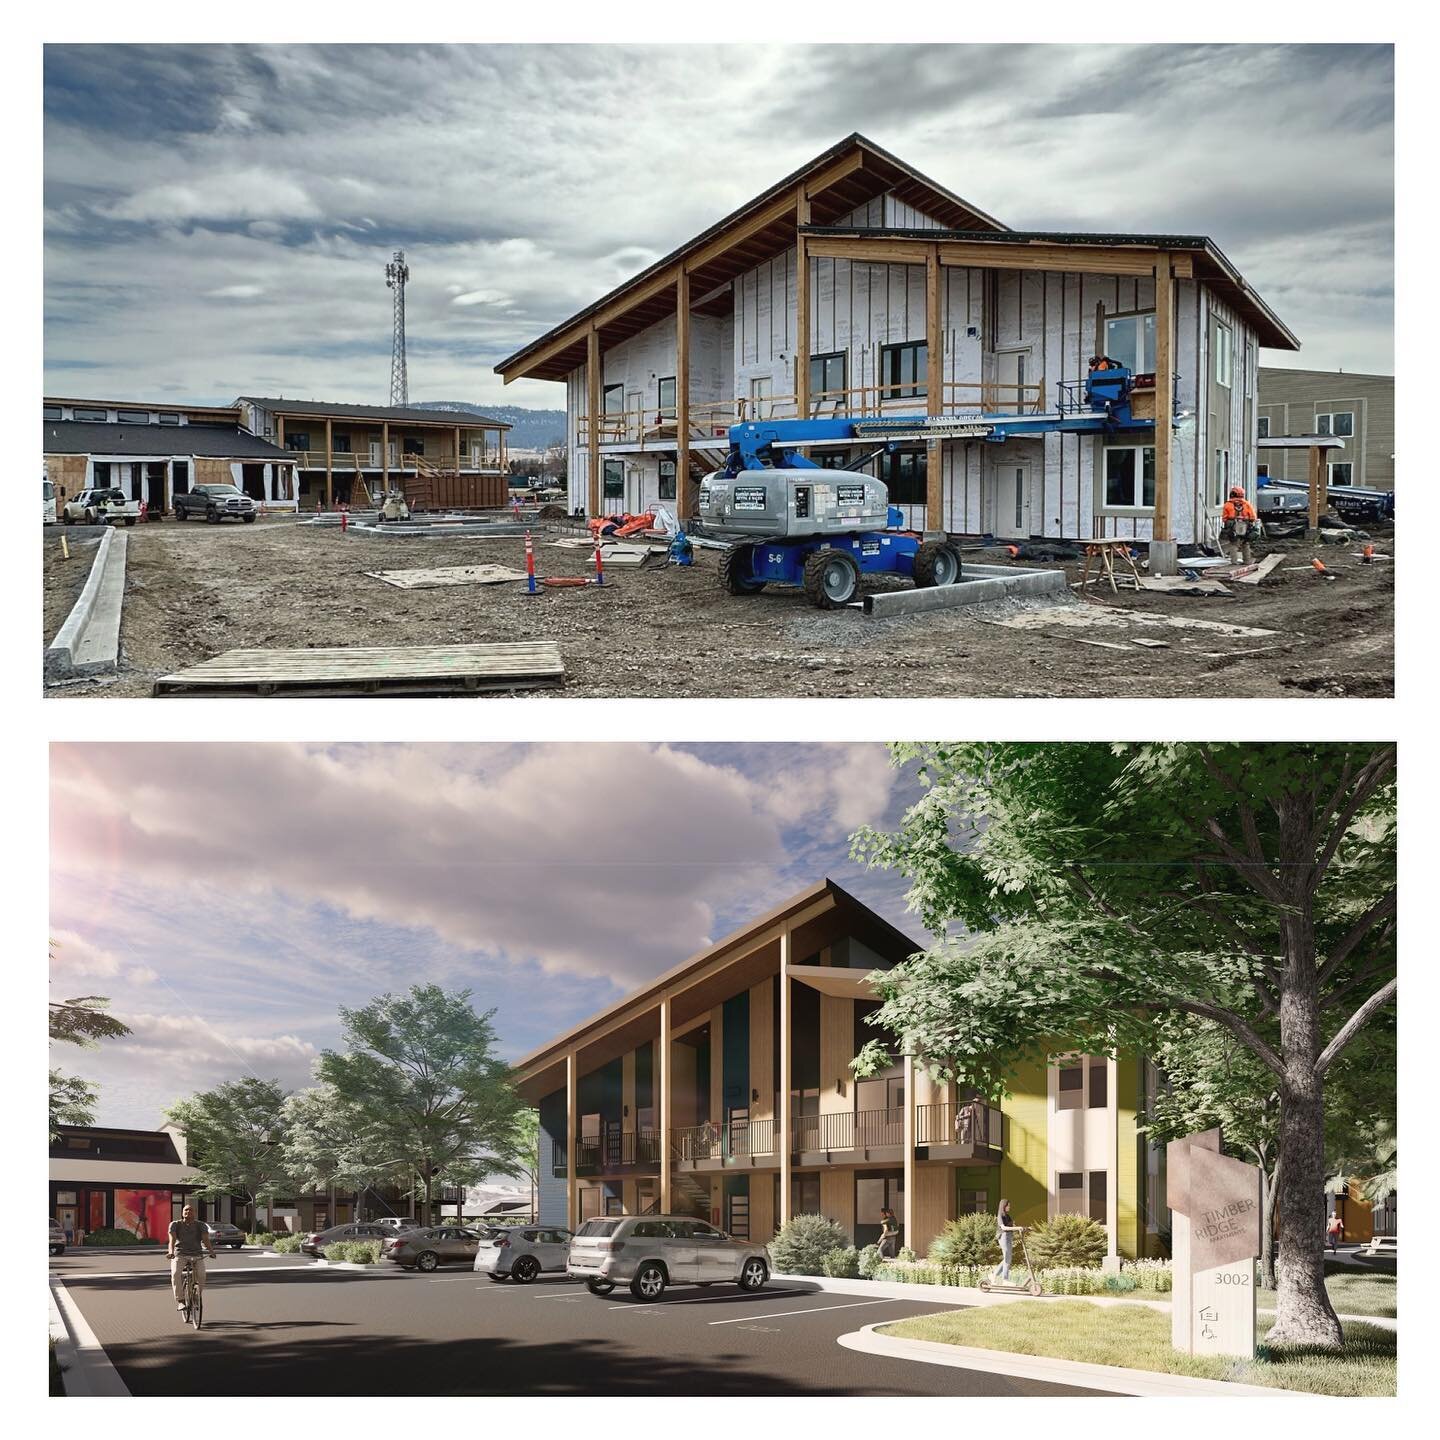 We love watching a project come to life&hellip;especially when you know it is going to provide much needed affordable housing and beautiful outdoor community spaces 🫶🏻

#affordablehousing #architecture #design #community #housingisahumanright #comm